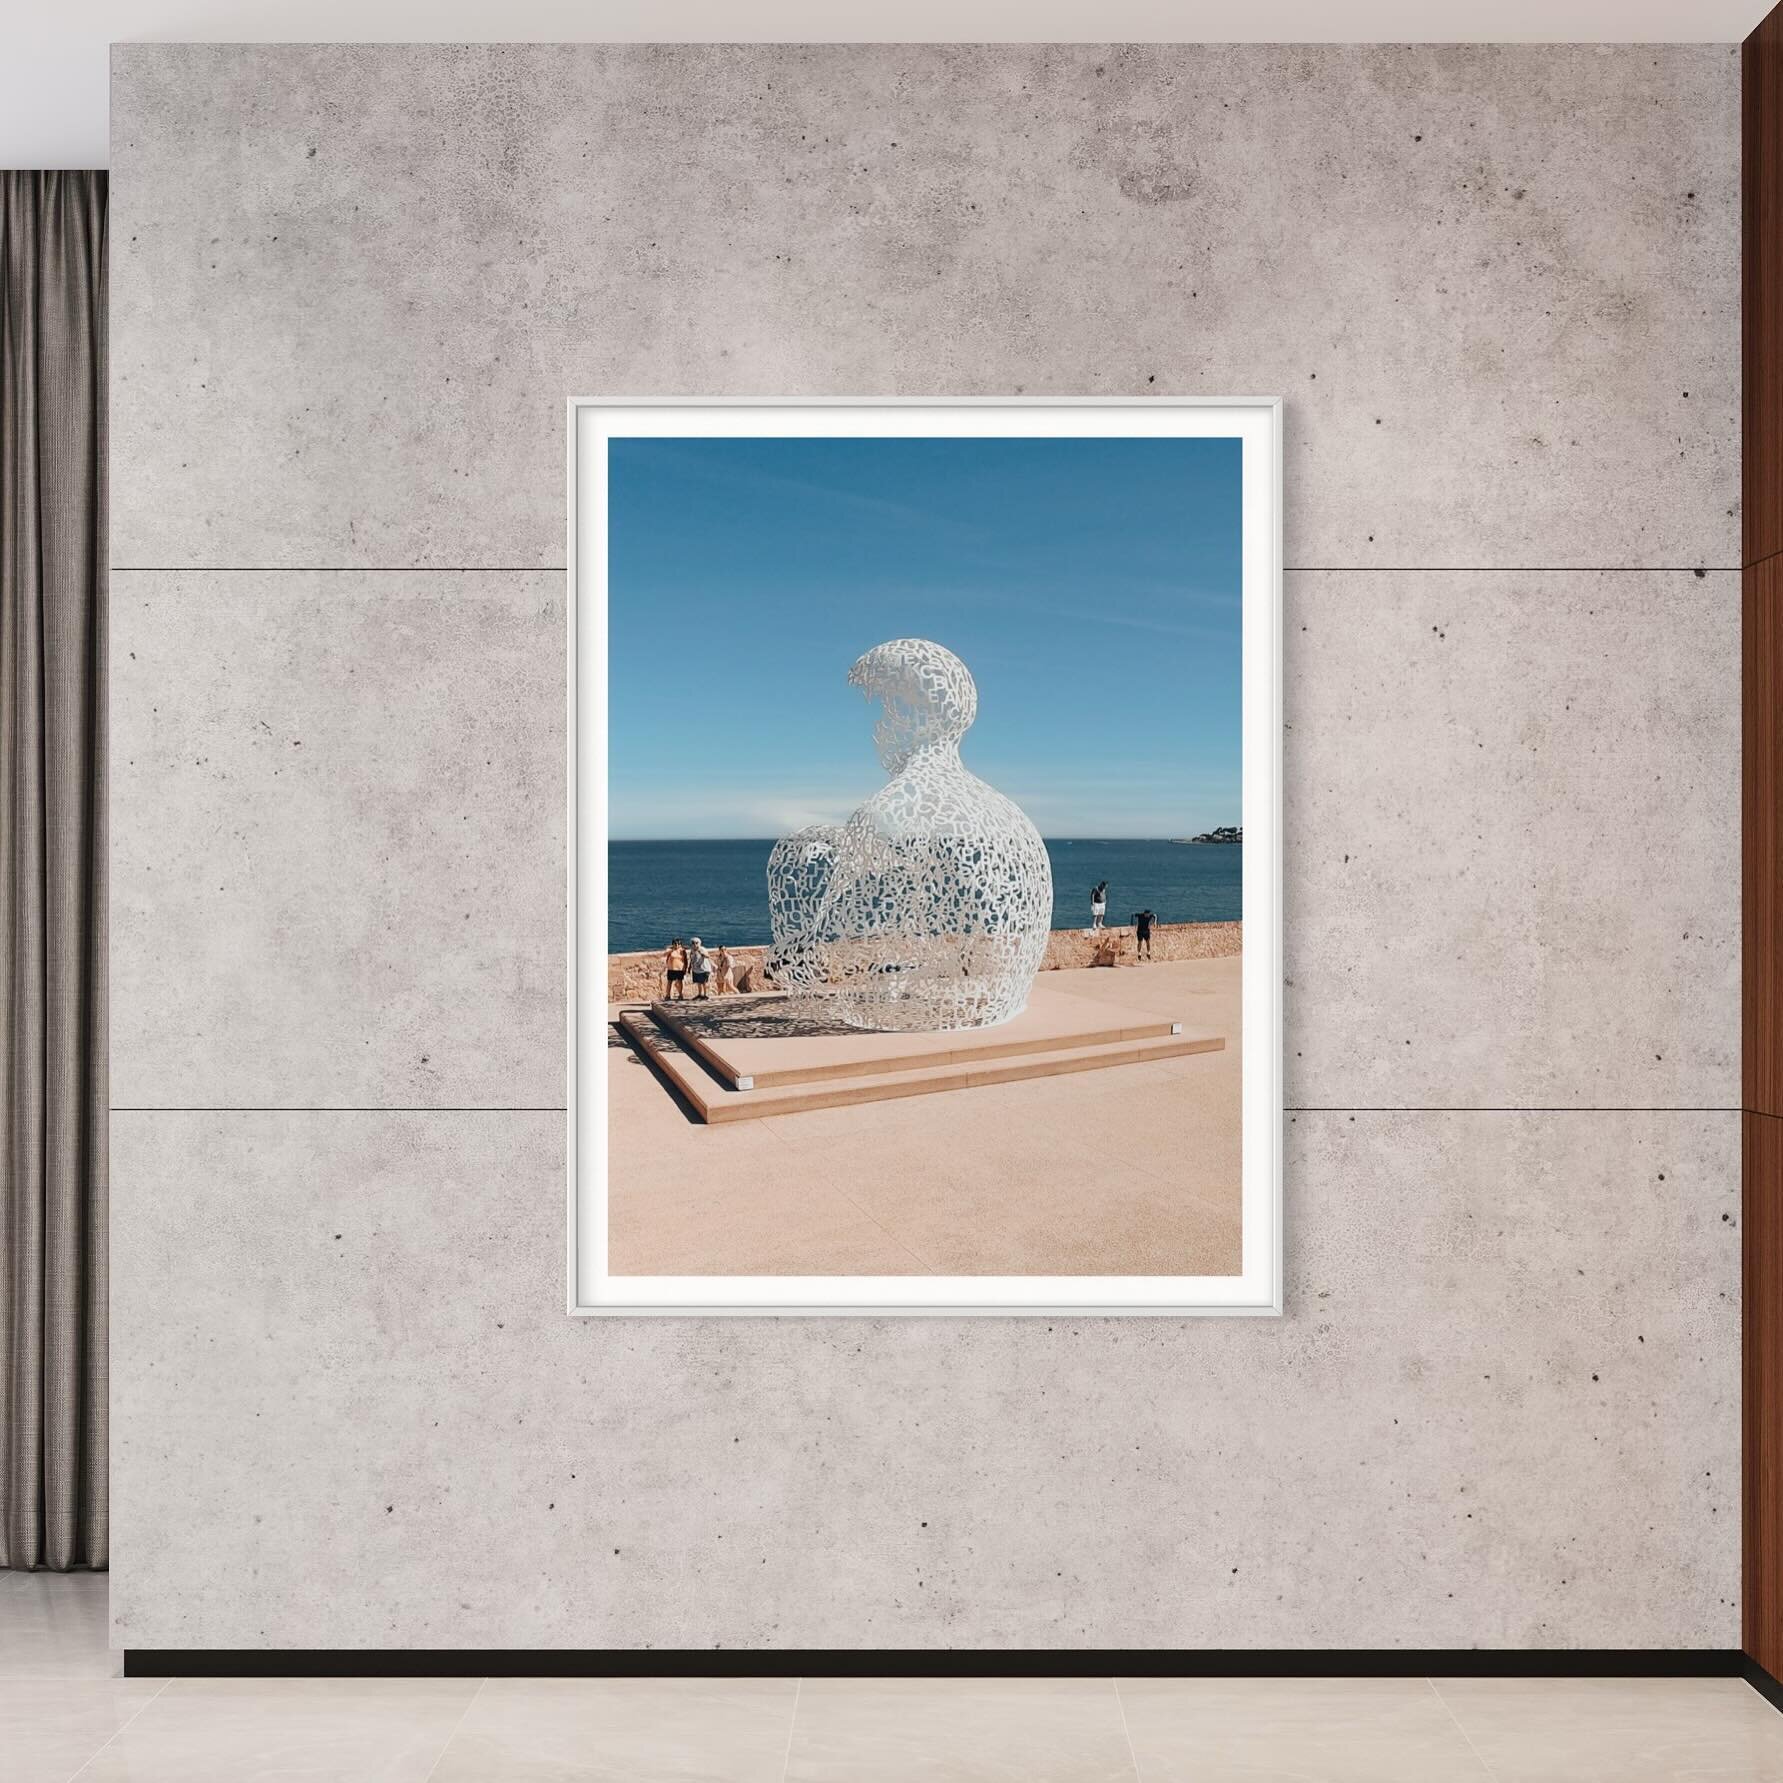 Le Nomade, Antibes.

Now available in all of the usual sizes. Head over to the website for more information - #linkinbio

#antibes #art #cotedazur